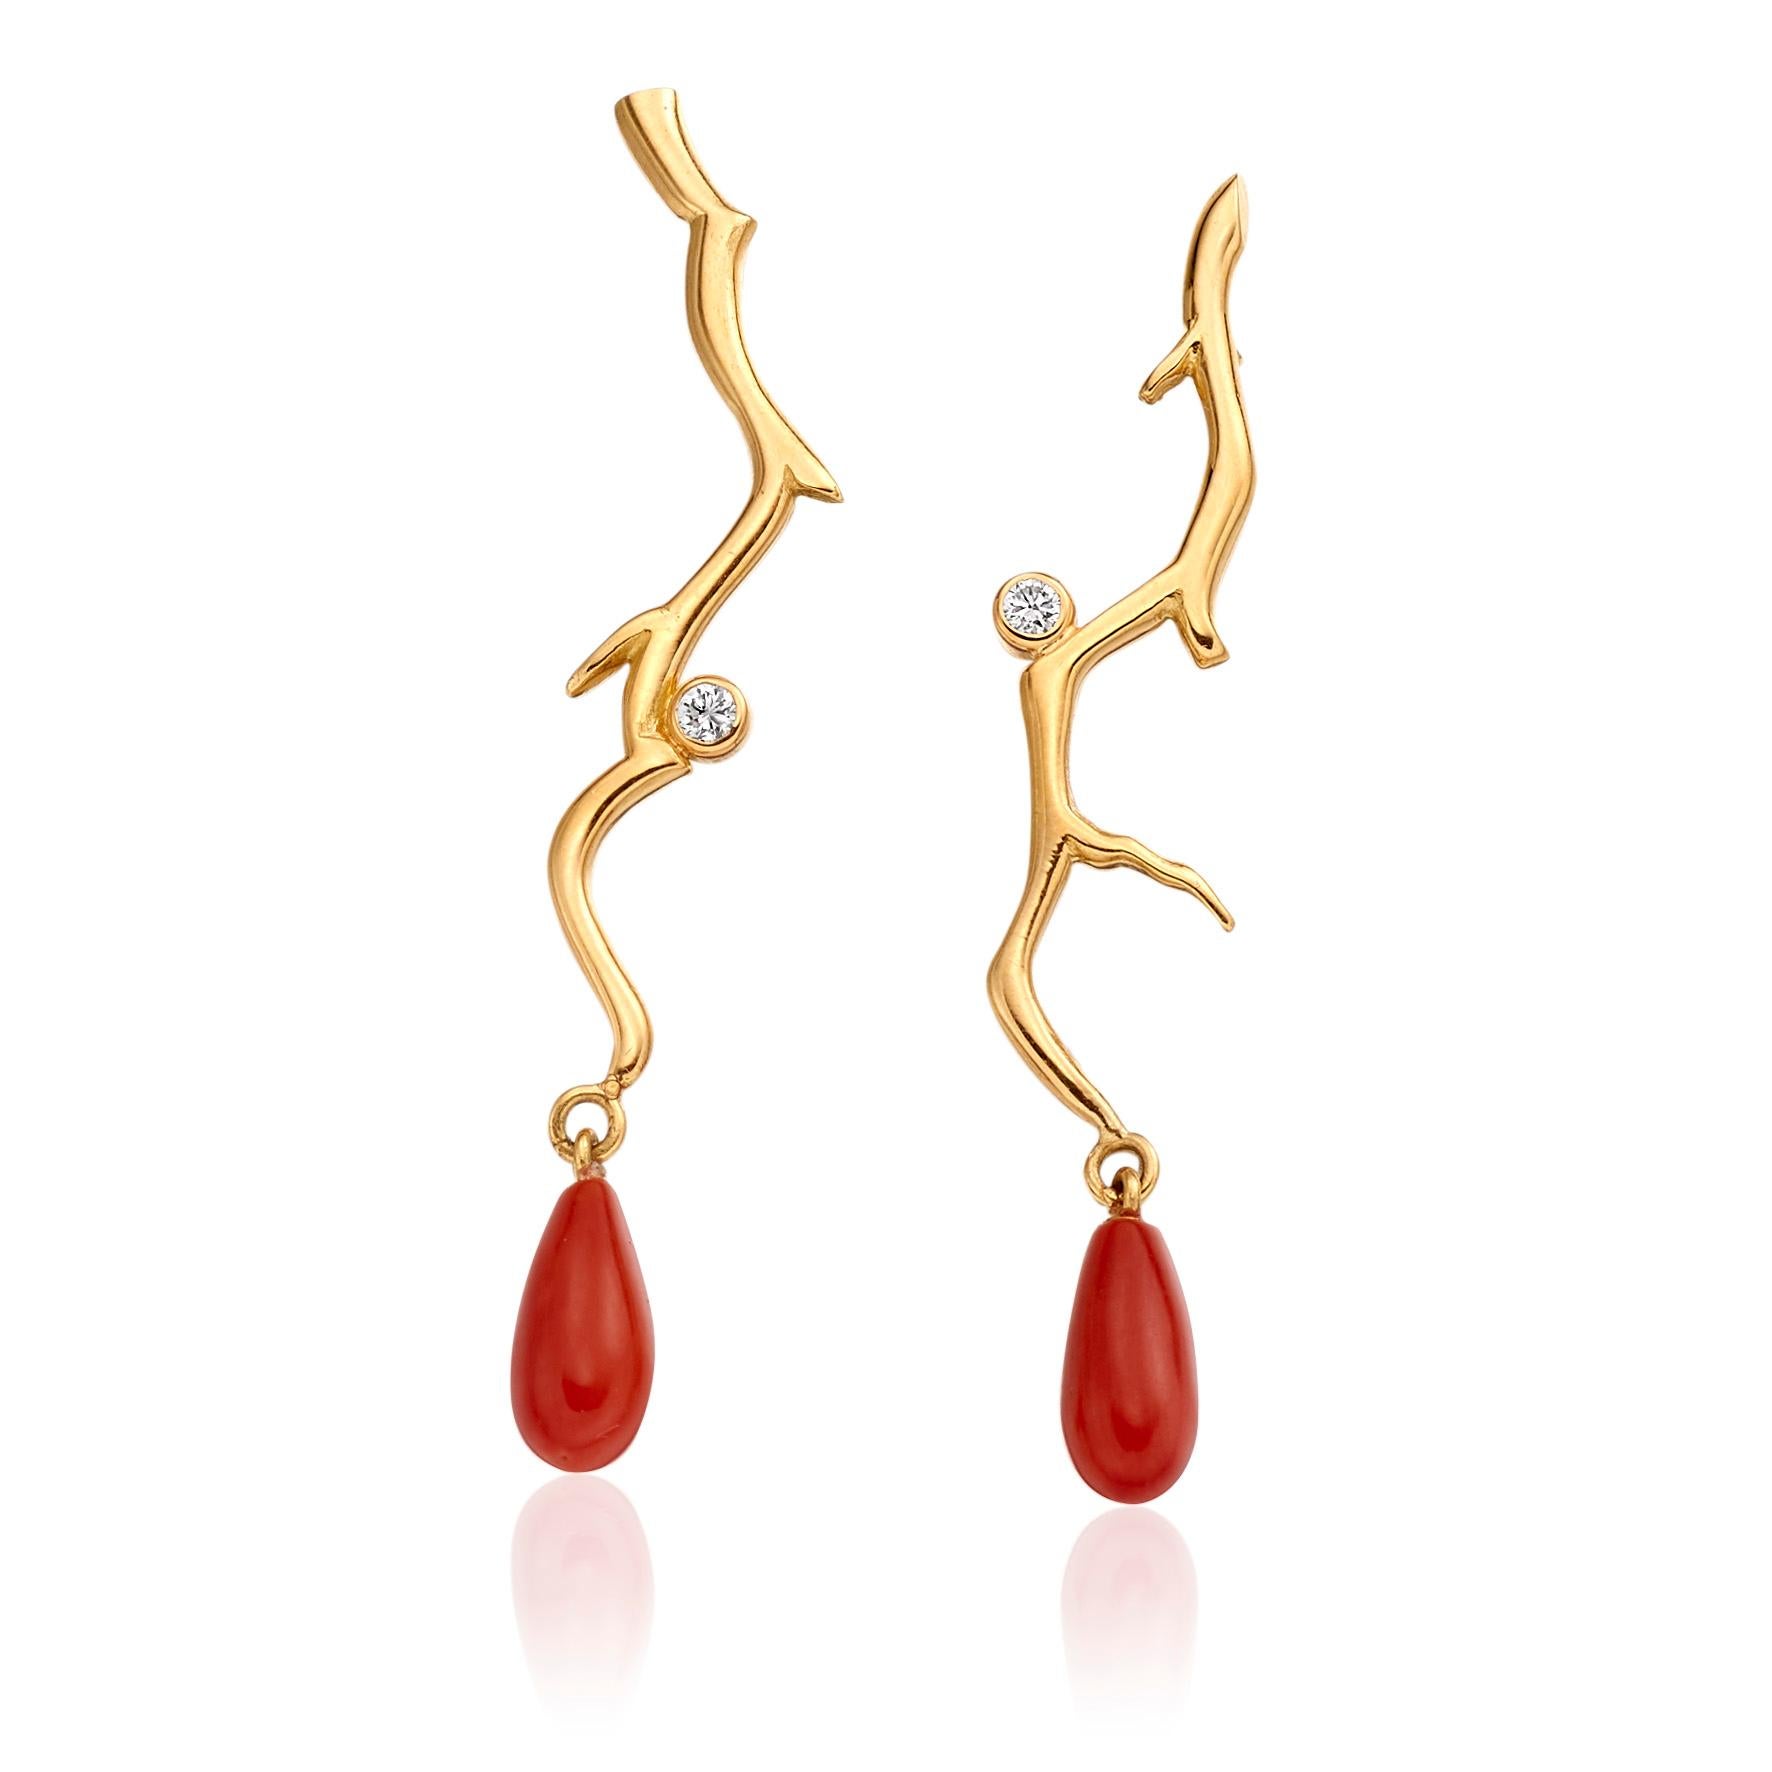 Taille ronde Lilly Hastedt, boucles d'oreilles Reflections mini inspiration corail en vente